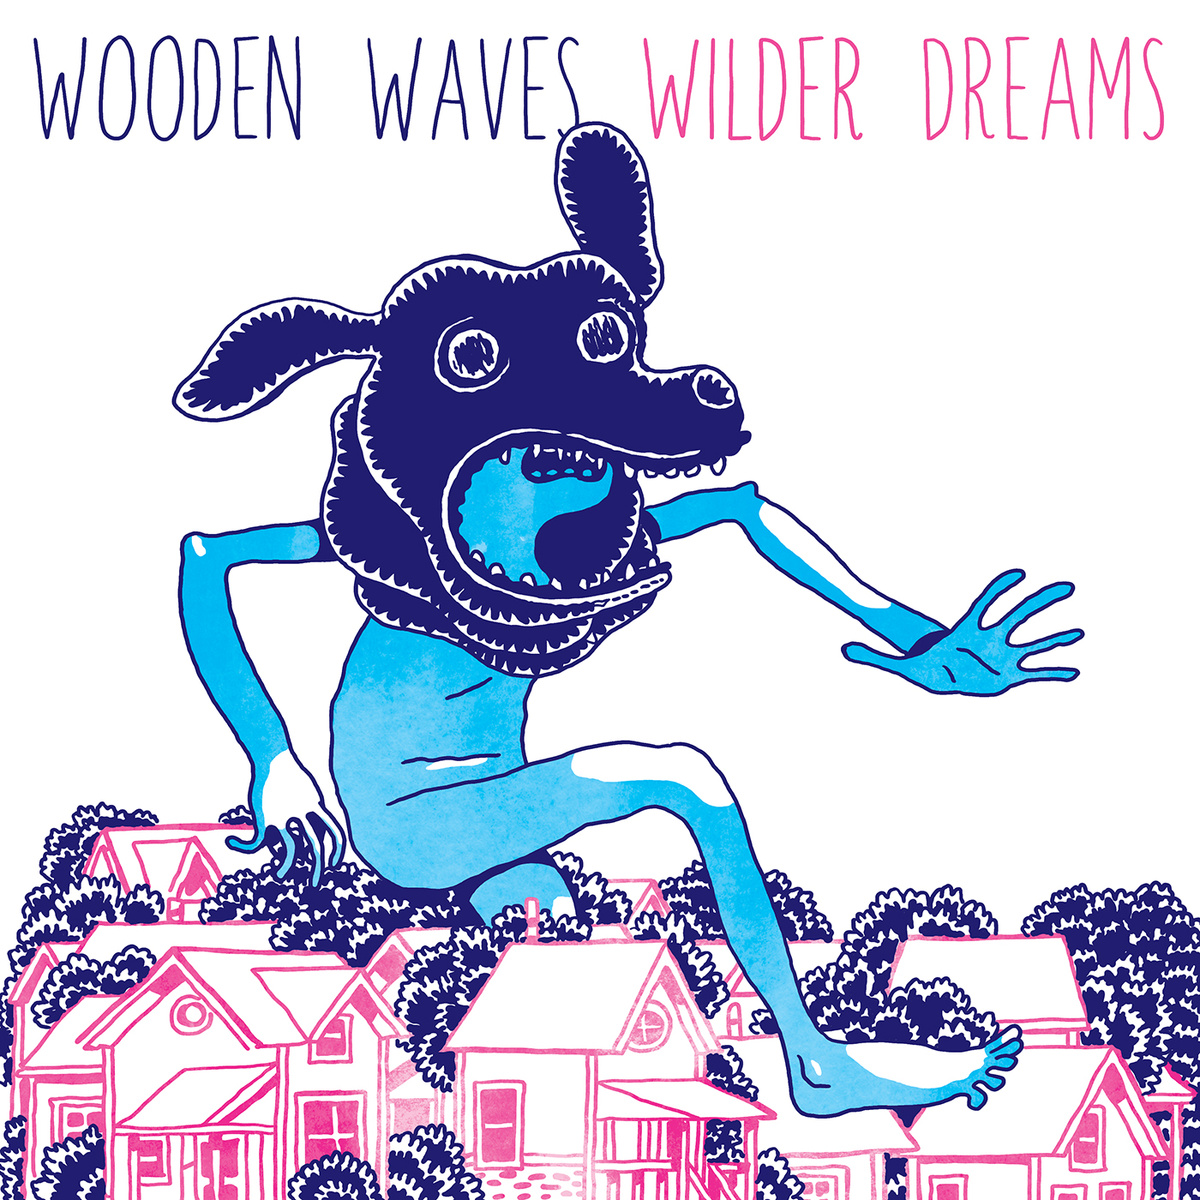 Tonight: Wooden Waves LP Release Party